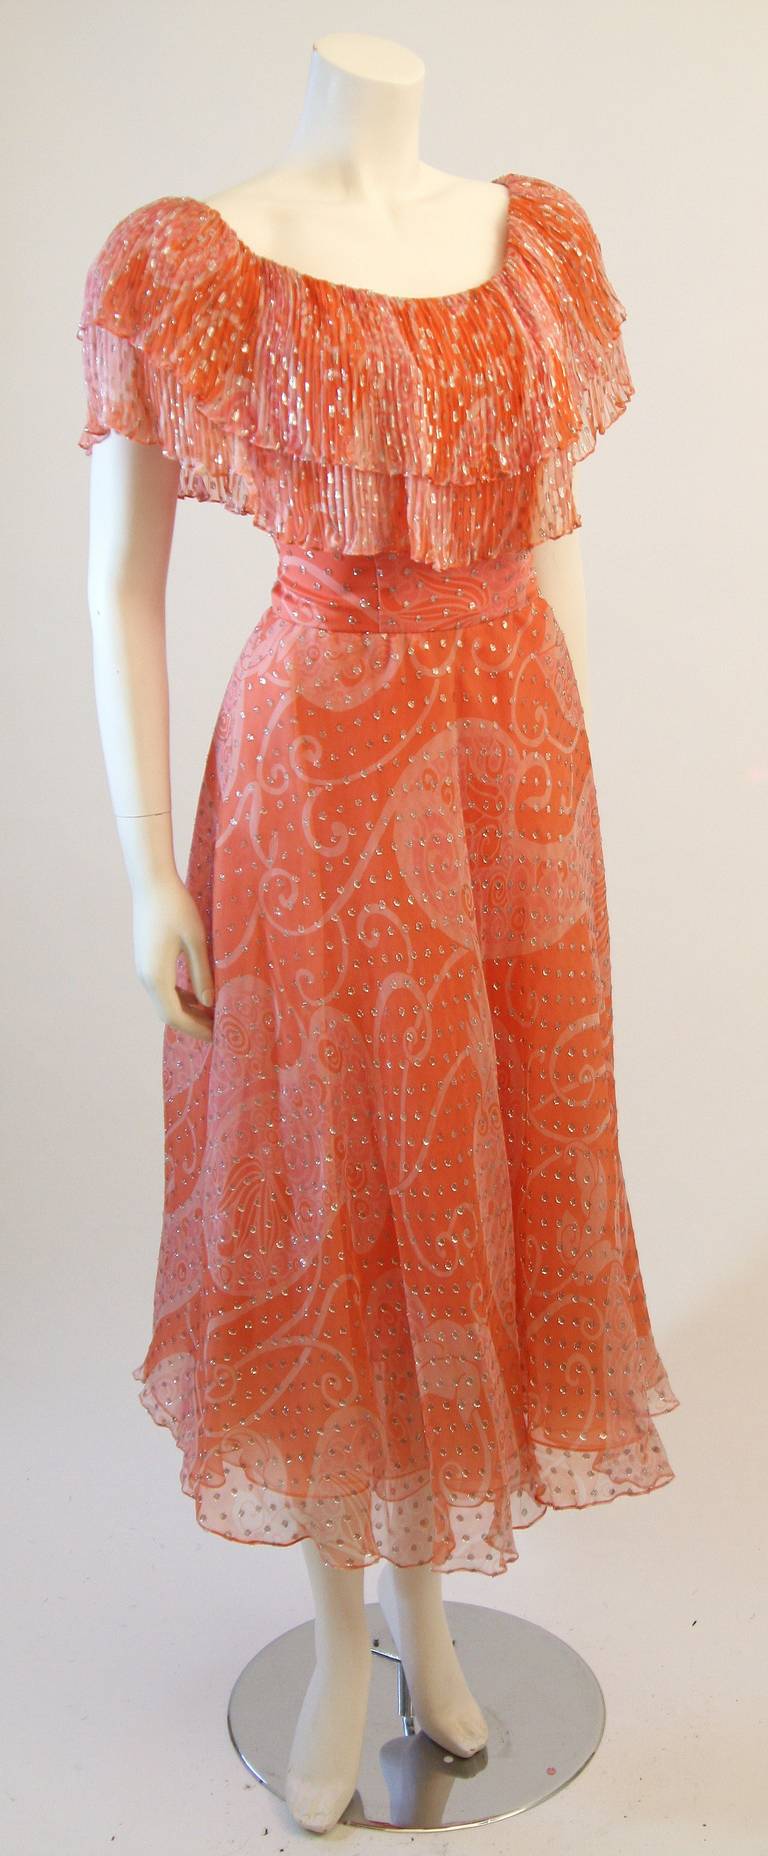 This is a wonderful Diane Dickerson. This dress is composed of a wonderful coral silk chiffon with a mixture orange cream hues. The off the shoulder design is is accented with a pleated ruffle and accompanied by great flare style skirt. 

Measures